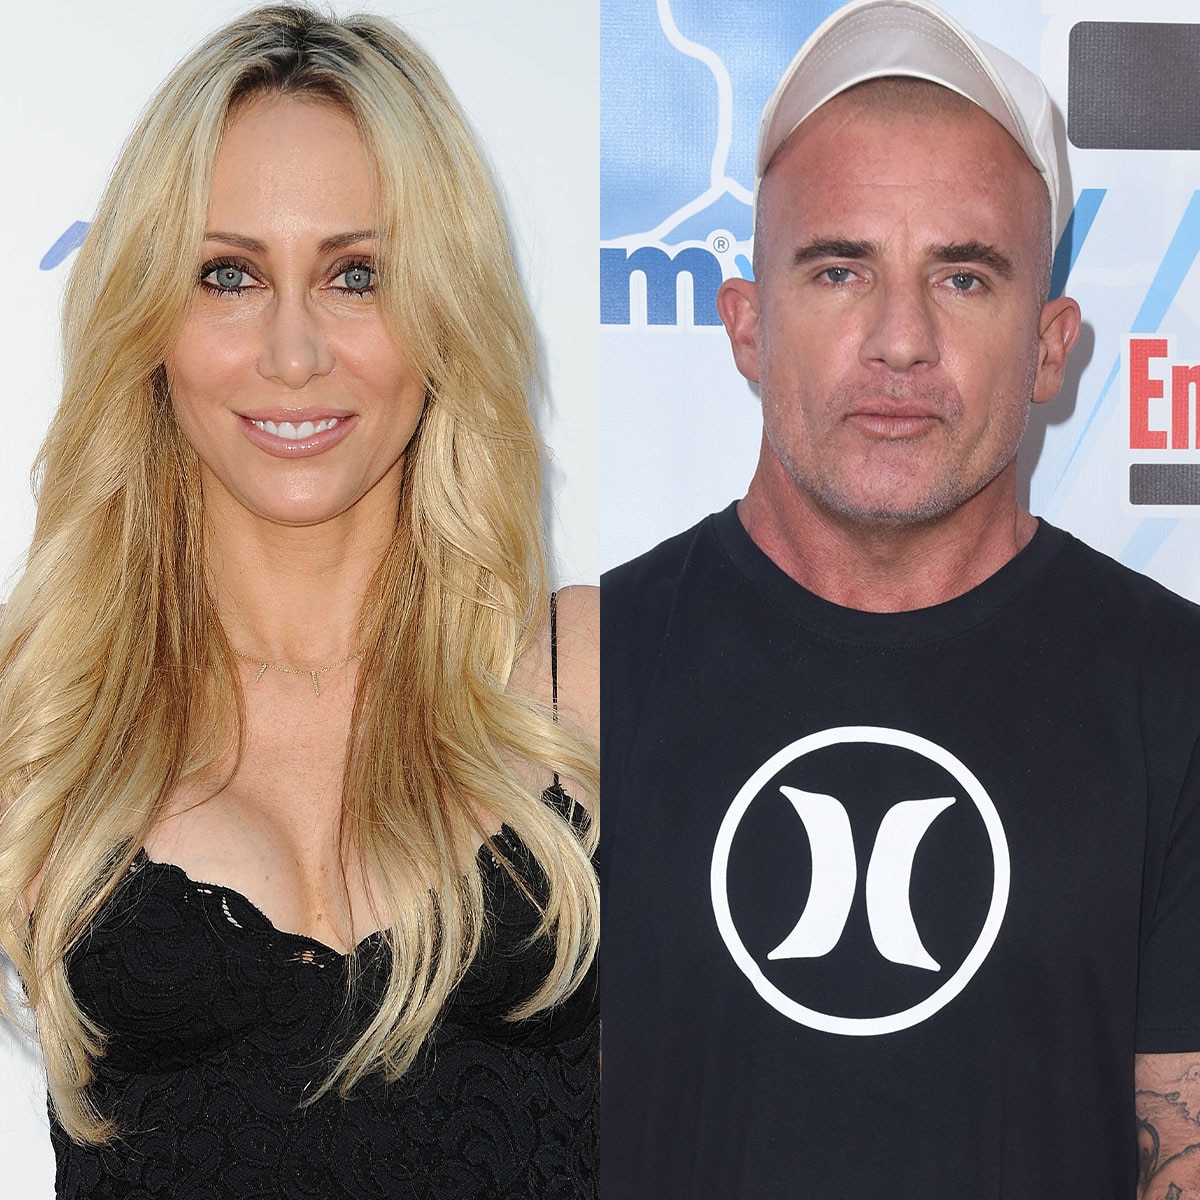 Tish Cyrus, Dominic Purcell